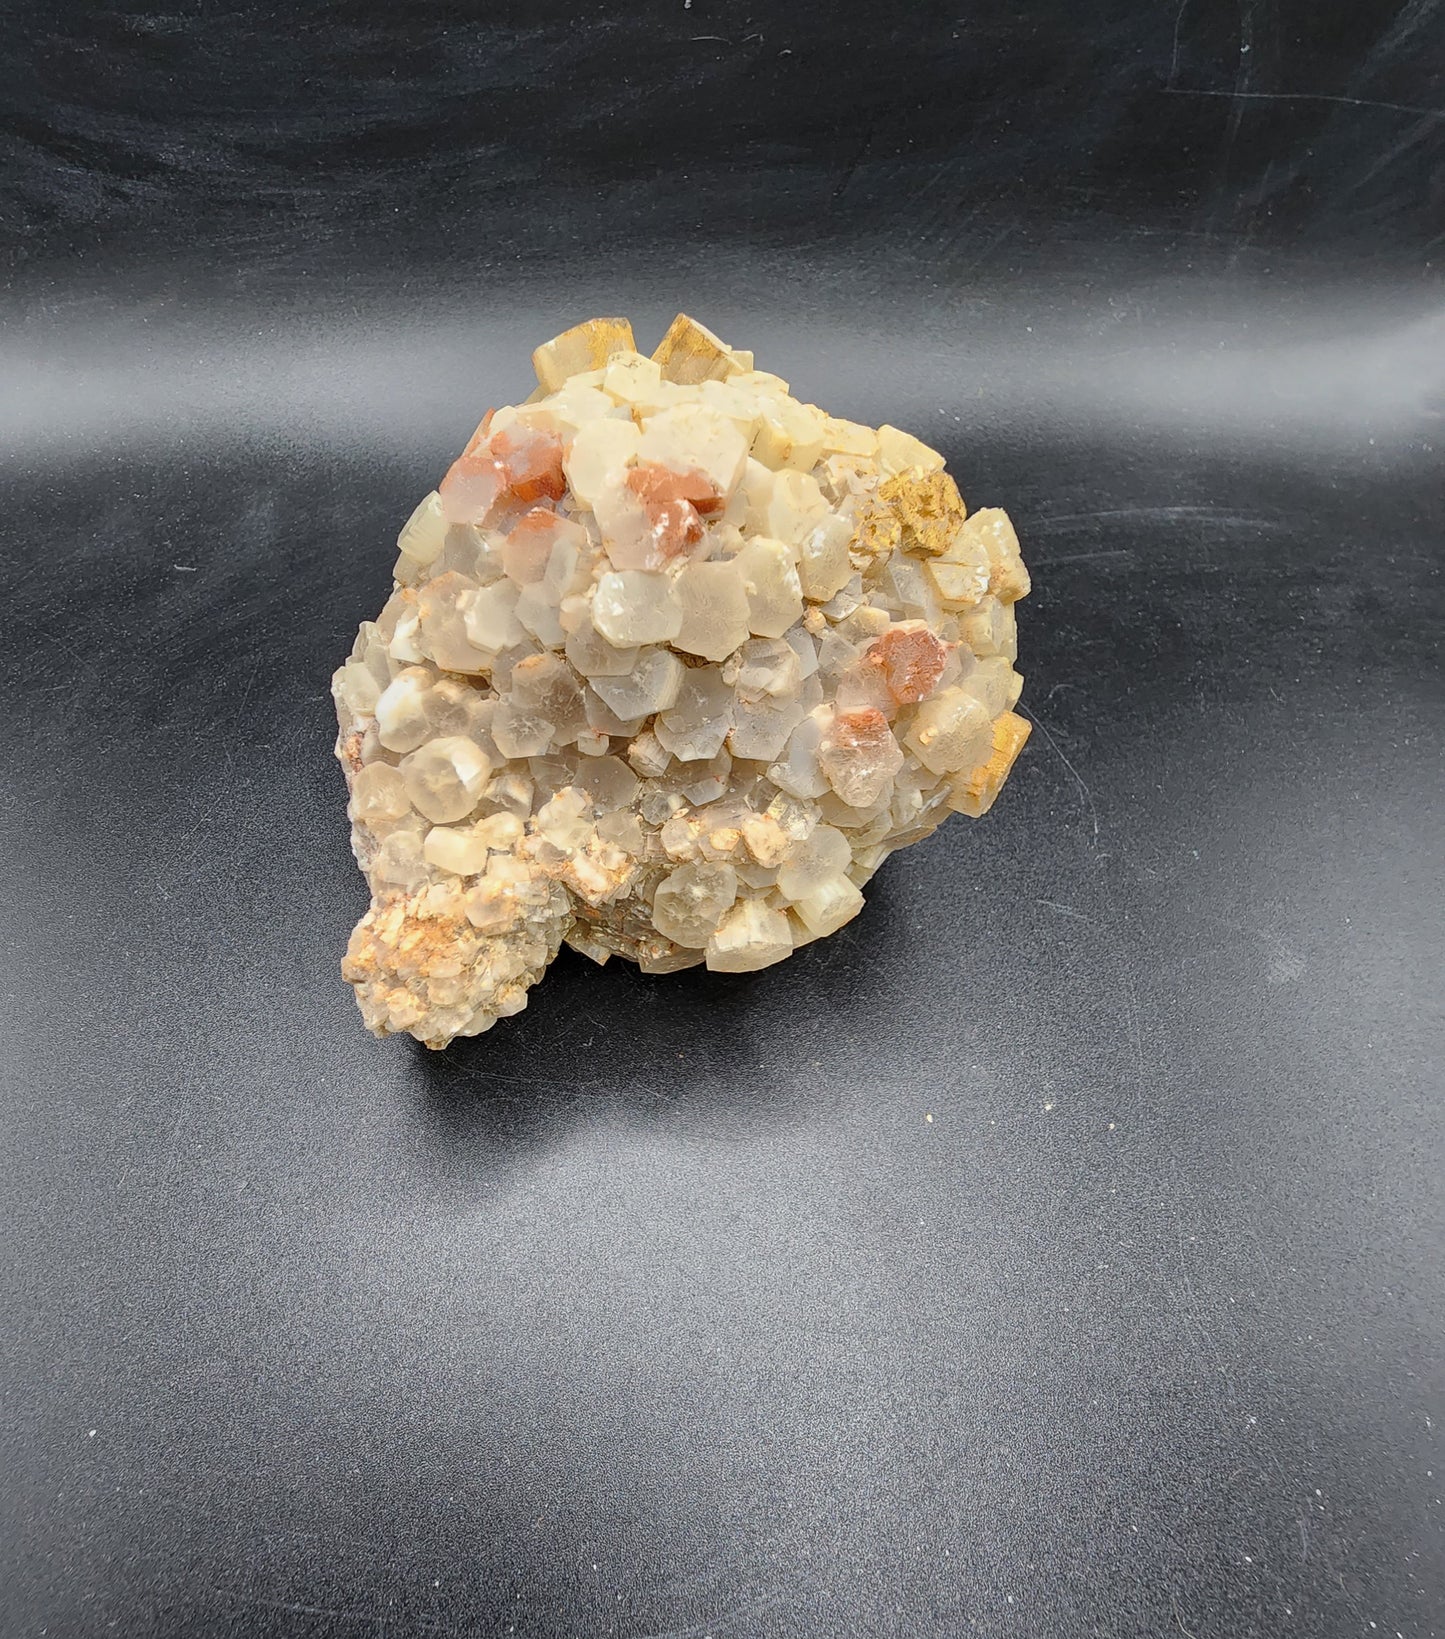 Awesome Aragonite Cluster